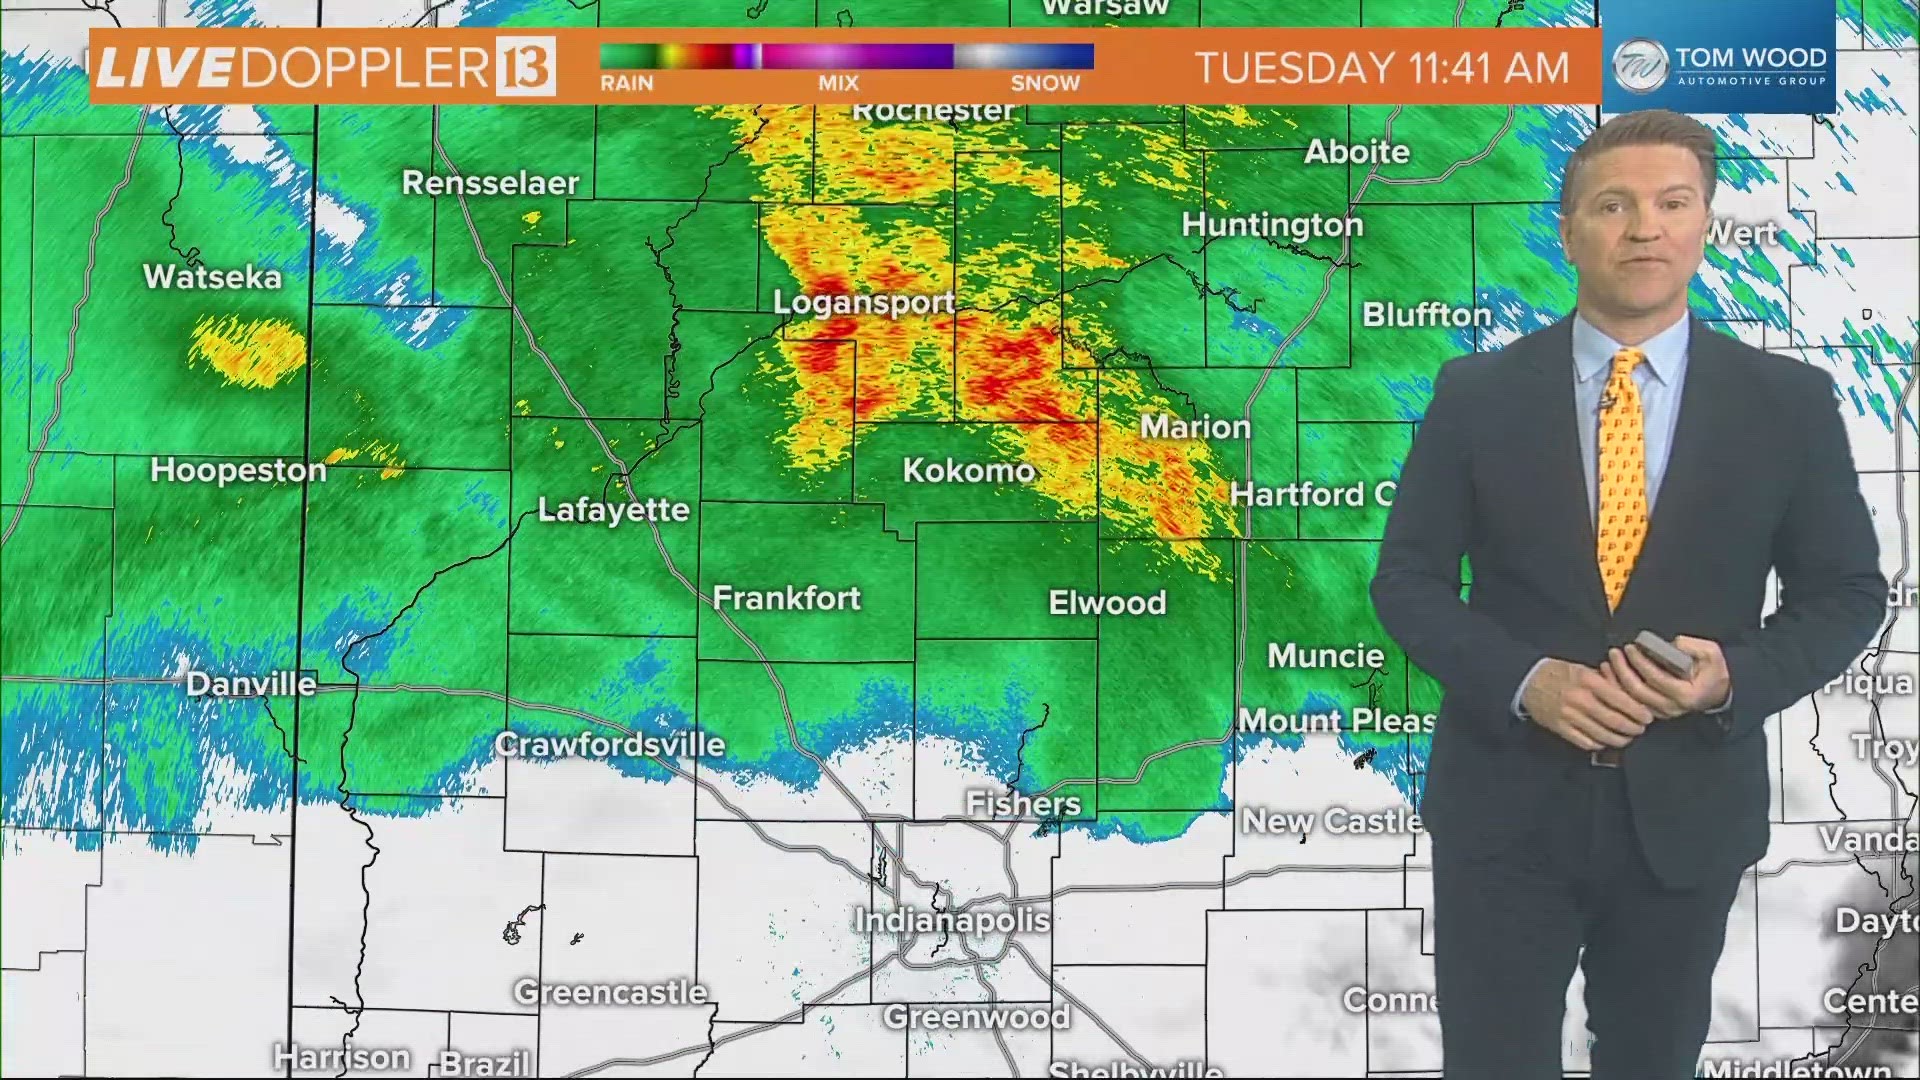 We are tracking rain this morning and to some extent, everyone will be in a place to get wet today in central Indiana.